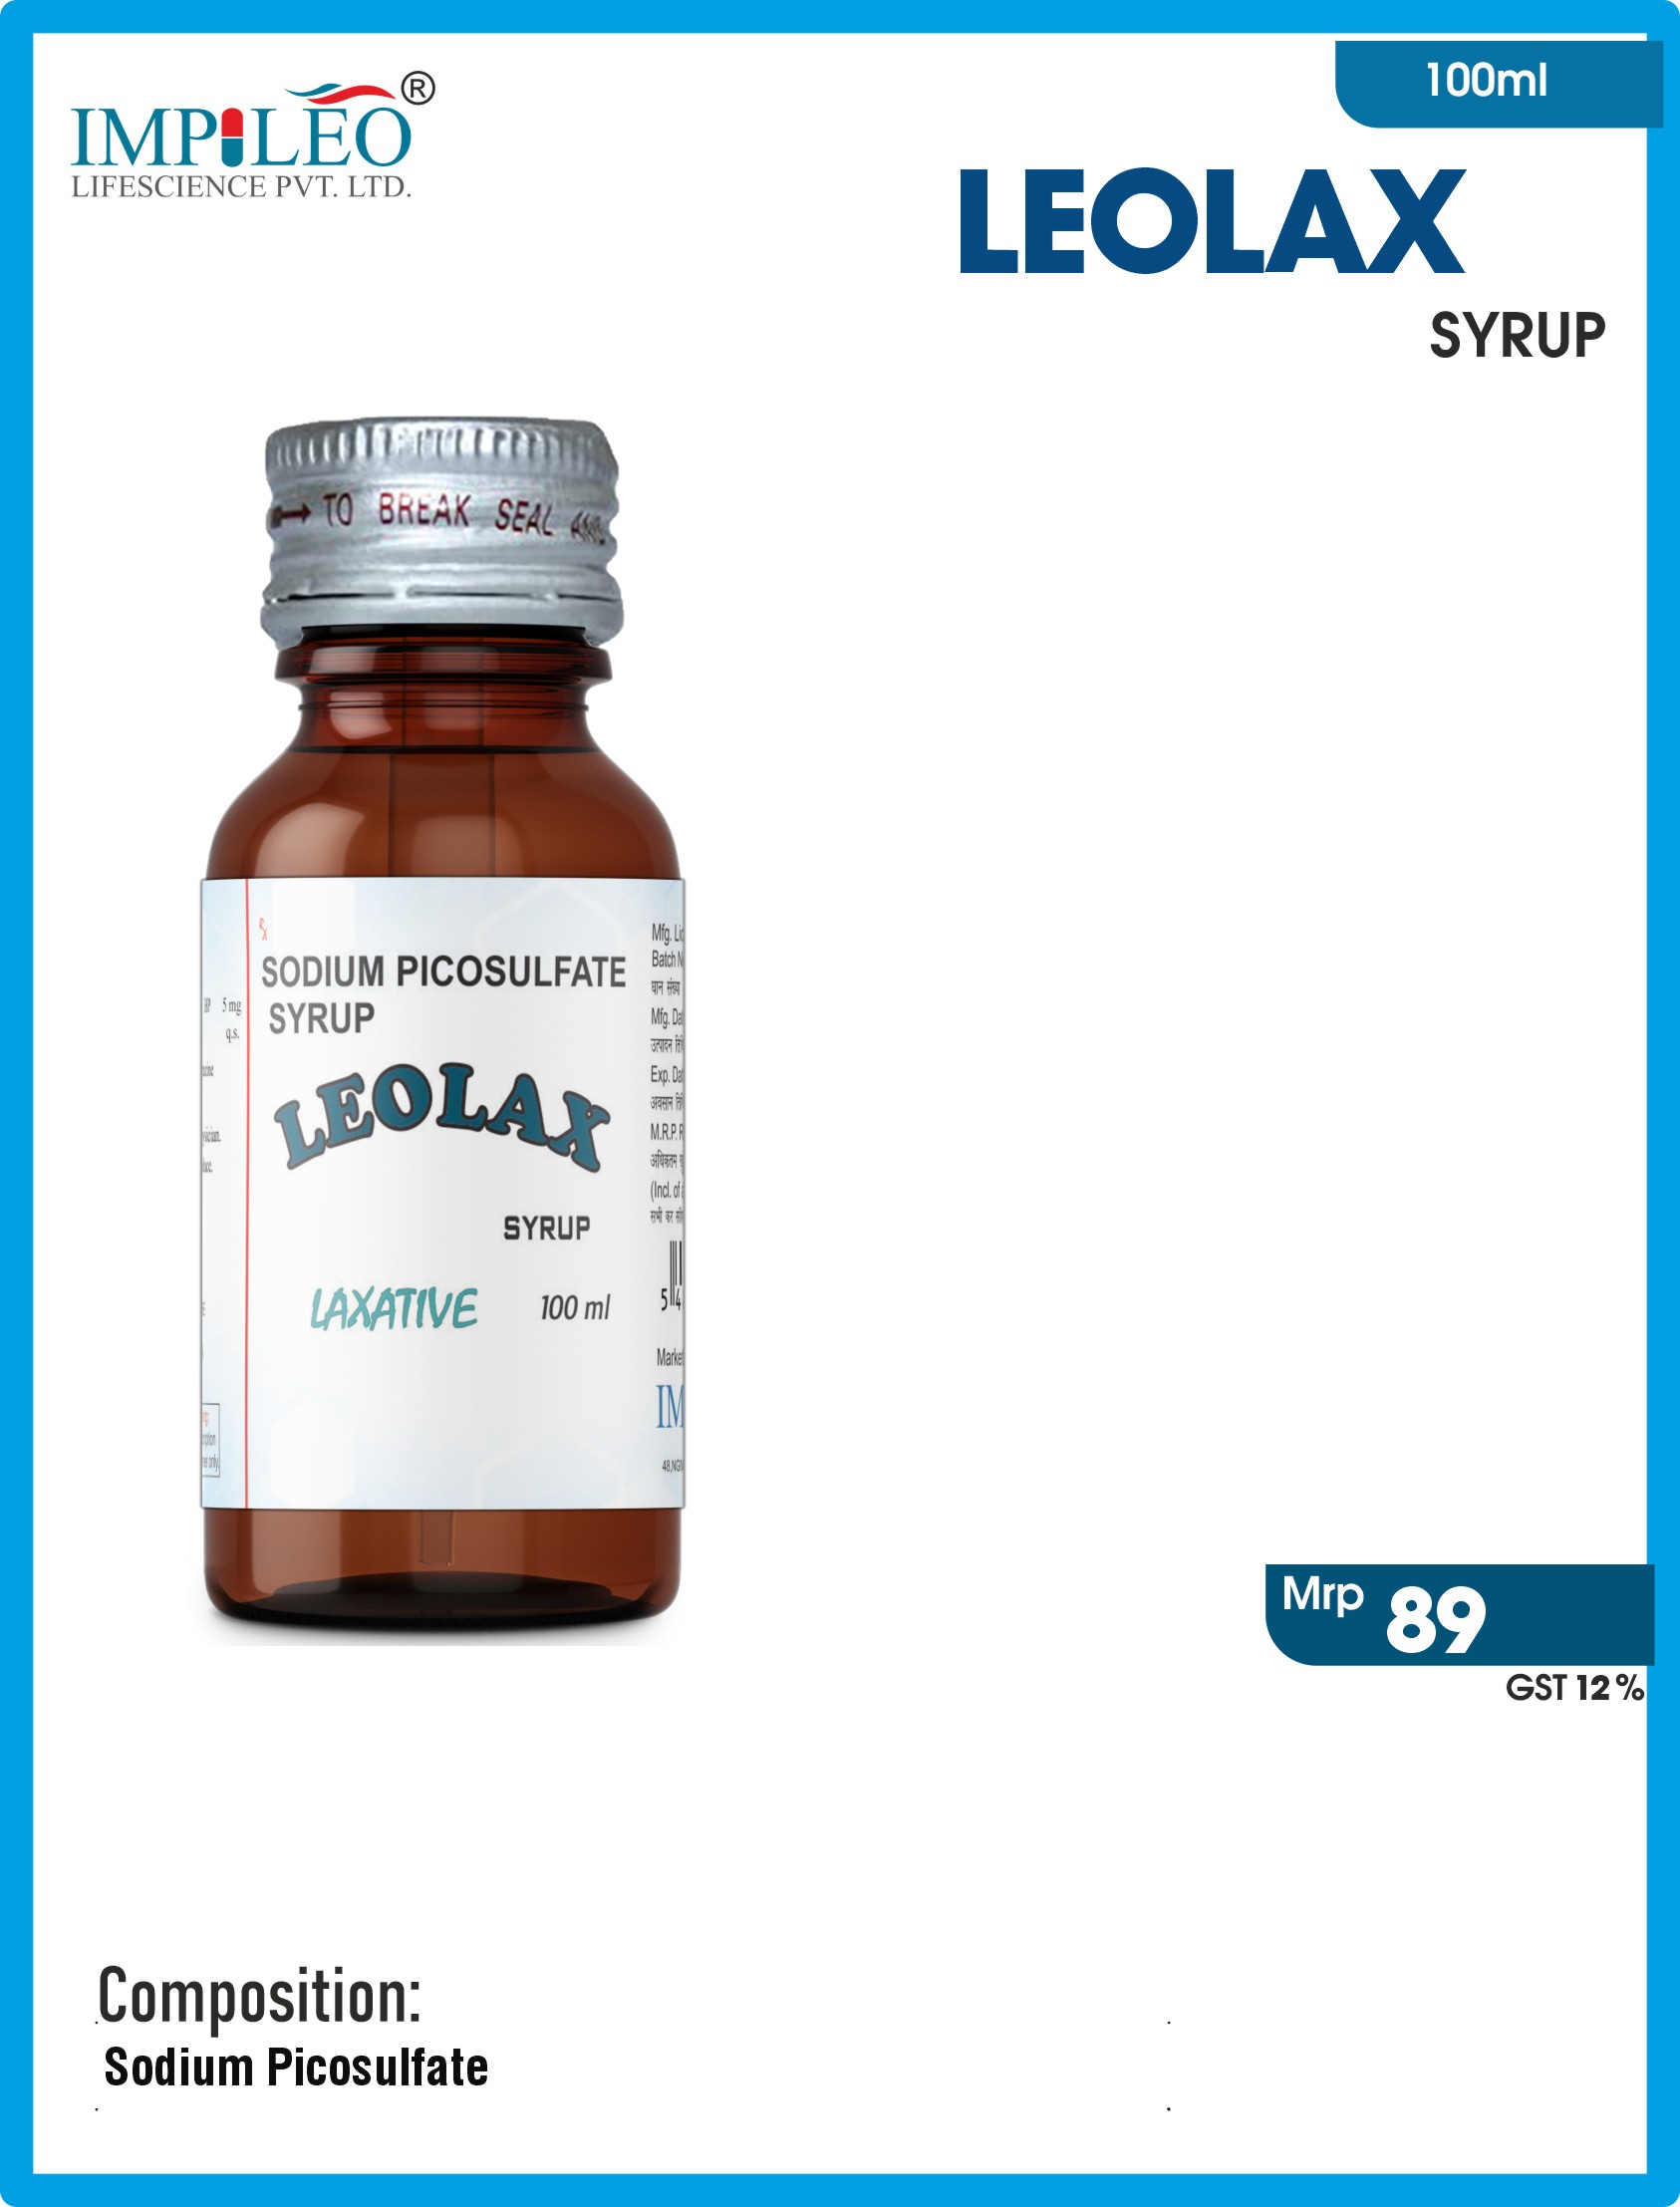 LEOLAX SYRUP: Enhancing Digestive Health with Premier Third-Party Manufacturing in India